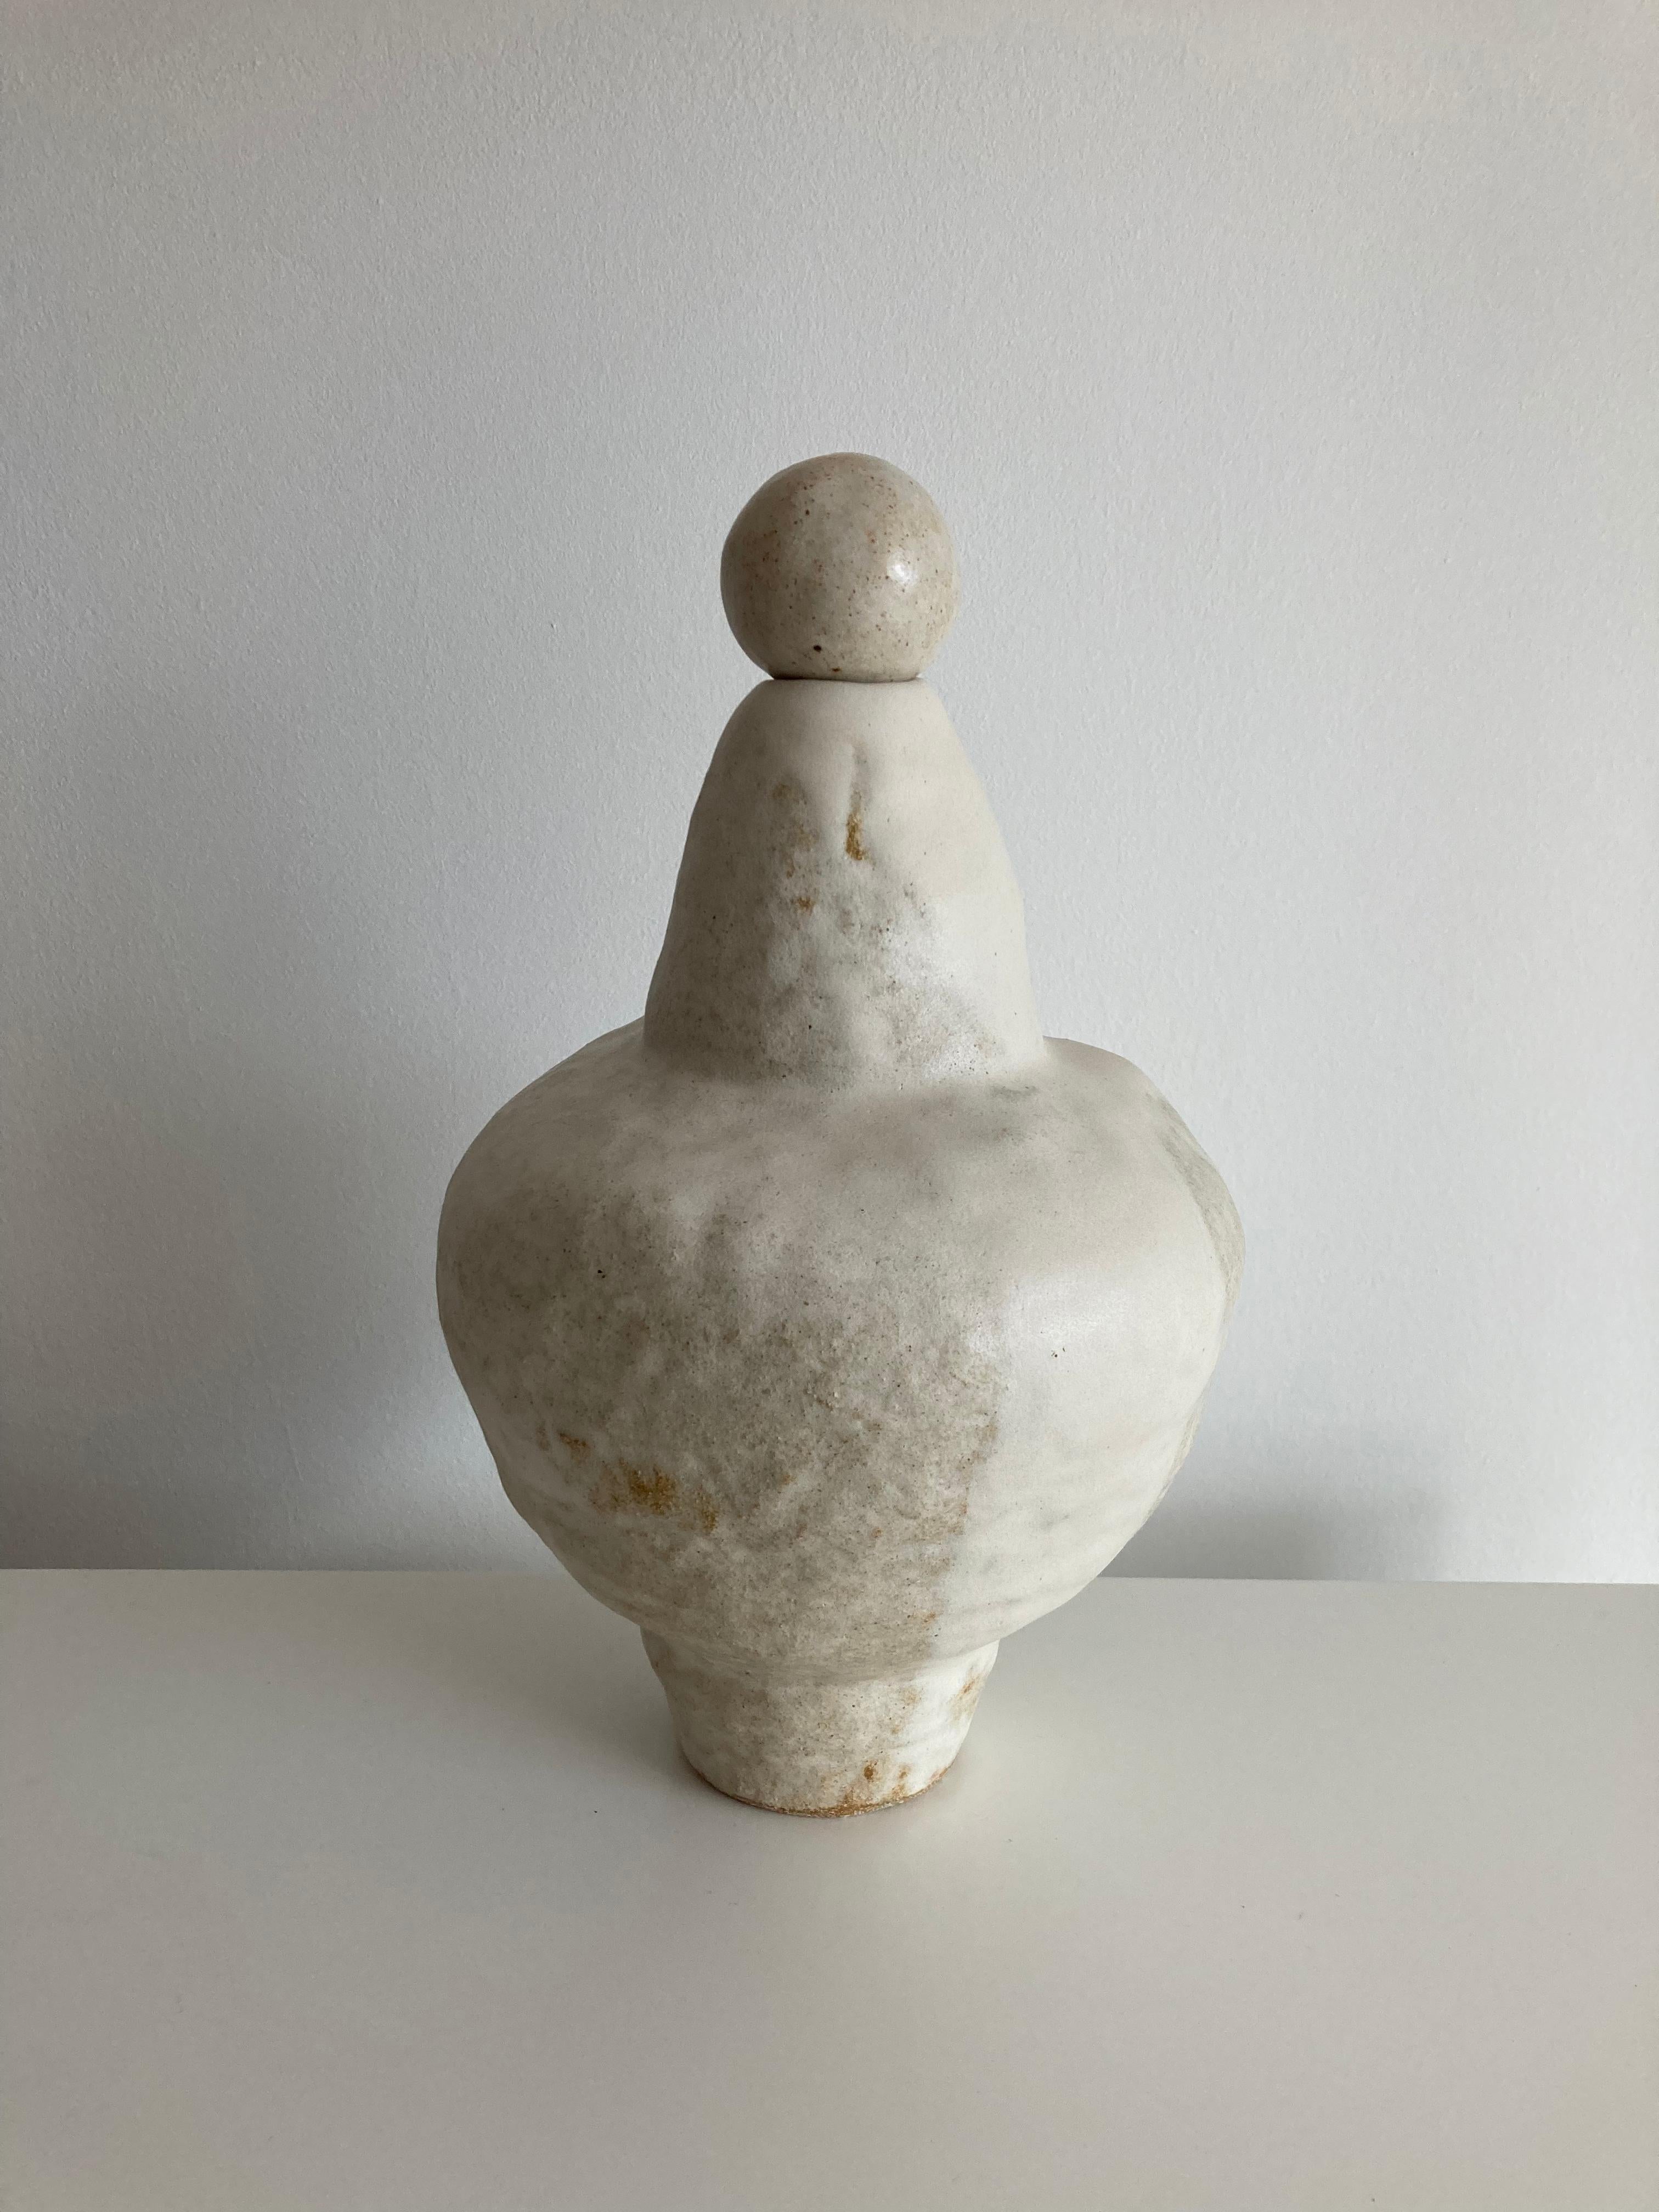 No.24 stoneware sculpture, Tonfisk by Ciona Lee 
One of a Kind
Dimensions: Ø 19 x H 26 cm
Materials: grogged stoneware, satin cream glaze
Variations of size and colour available

Tonfisk is the ceramic practice by Ciona Lee, a Korean-Italian